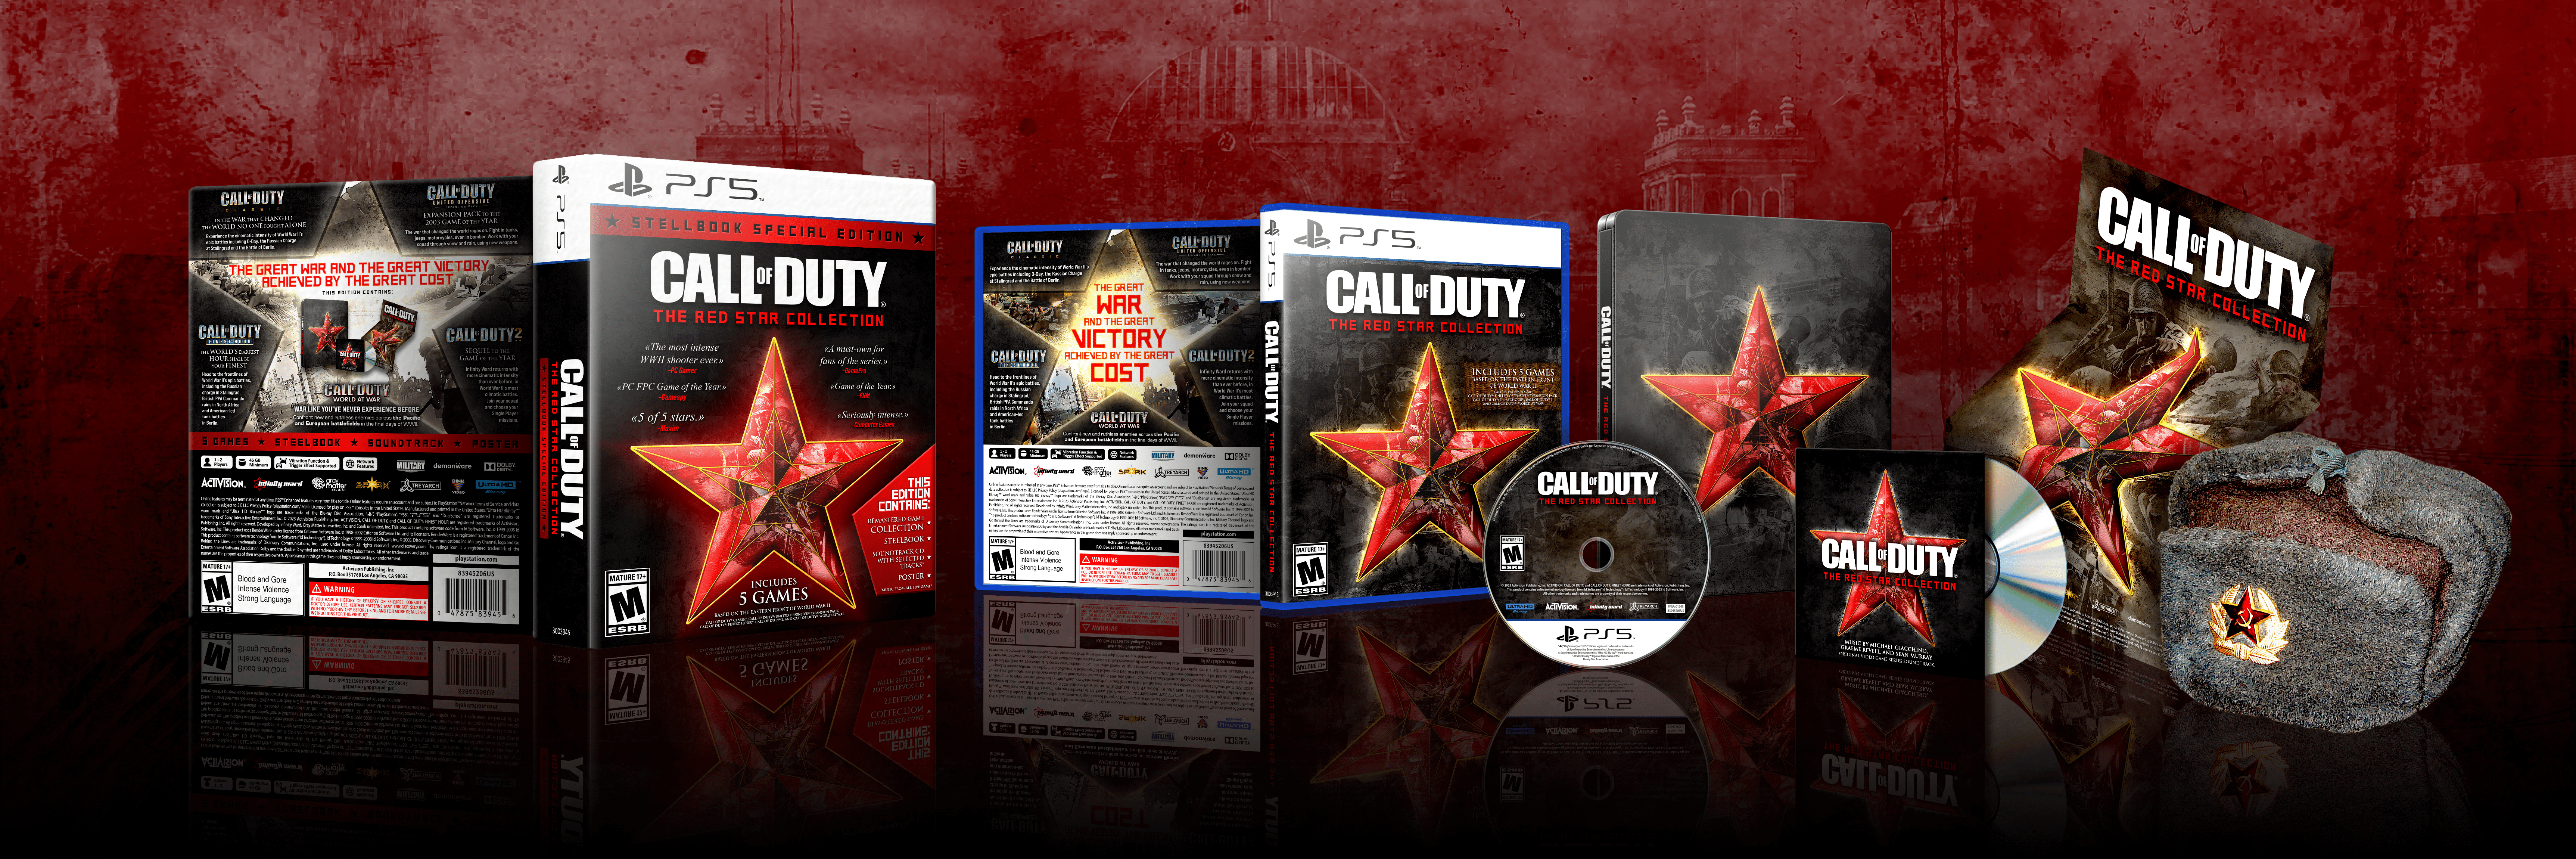 Call of Duty: The Red Star Collection box cover